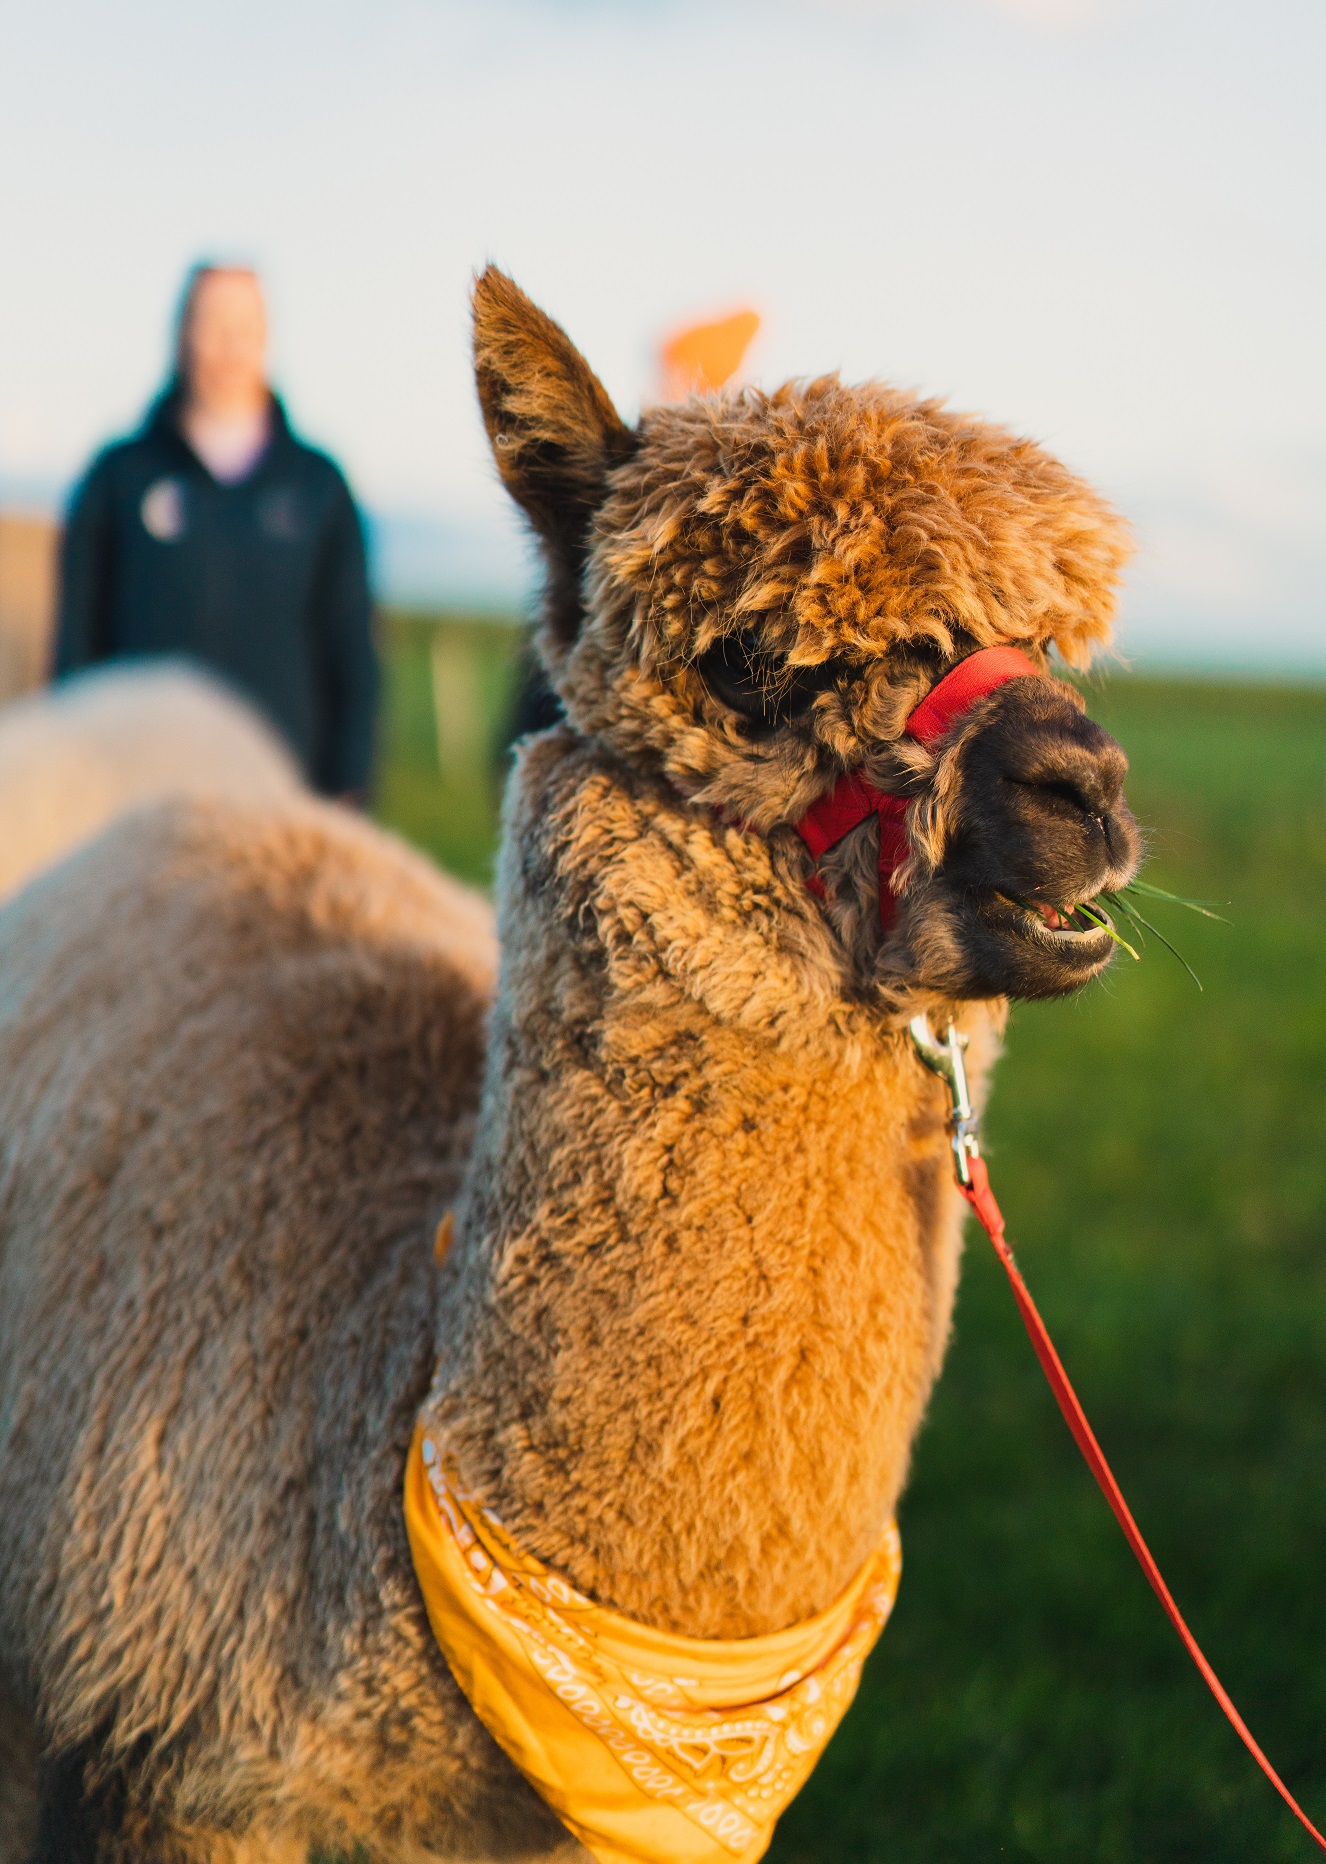 Close up of an alpaca walking towards the camera. It's wearing a yellow neck scarf and red harness and reins. In the background is a blurred out shape of a person following behind.